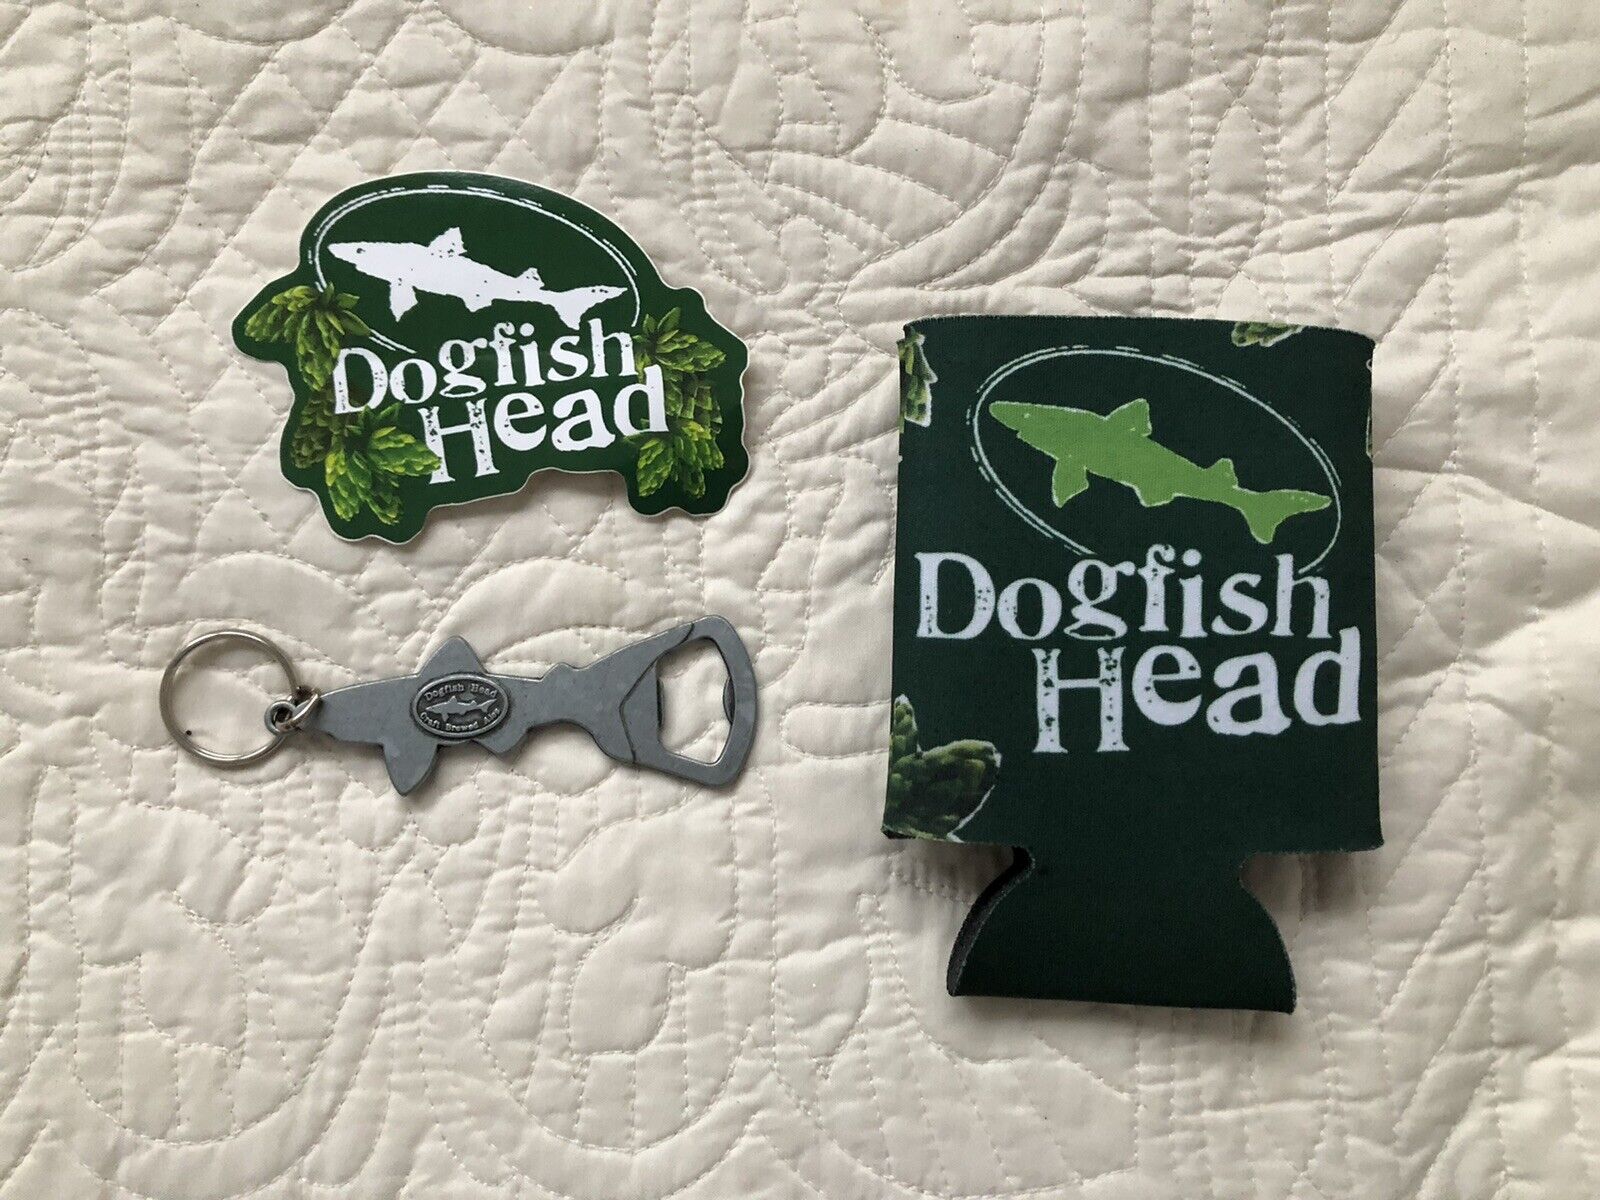 Koozie Key Chain Sticker Dogfish Head Beer Coozies HUGGY New Brewery